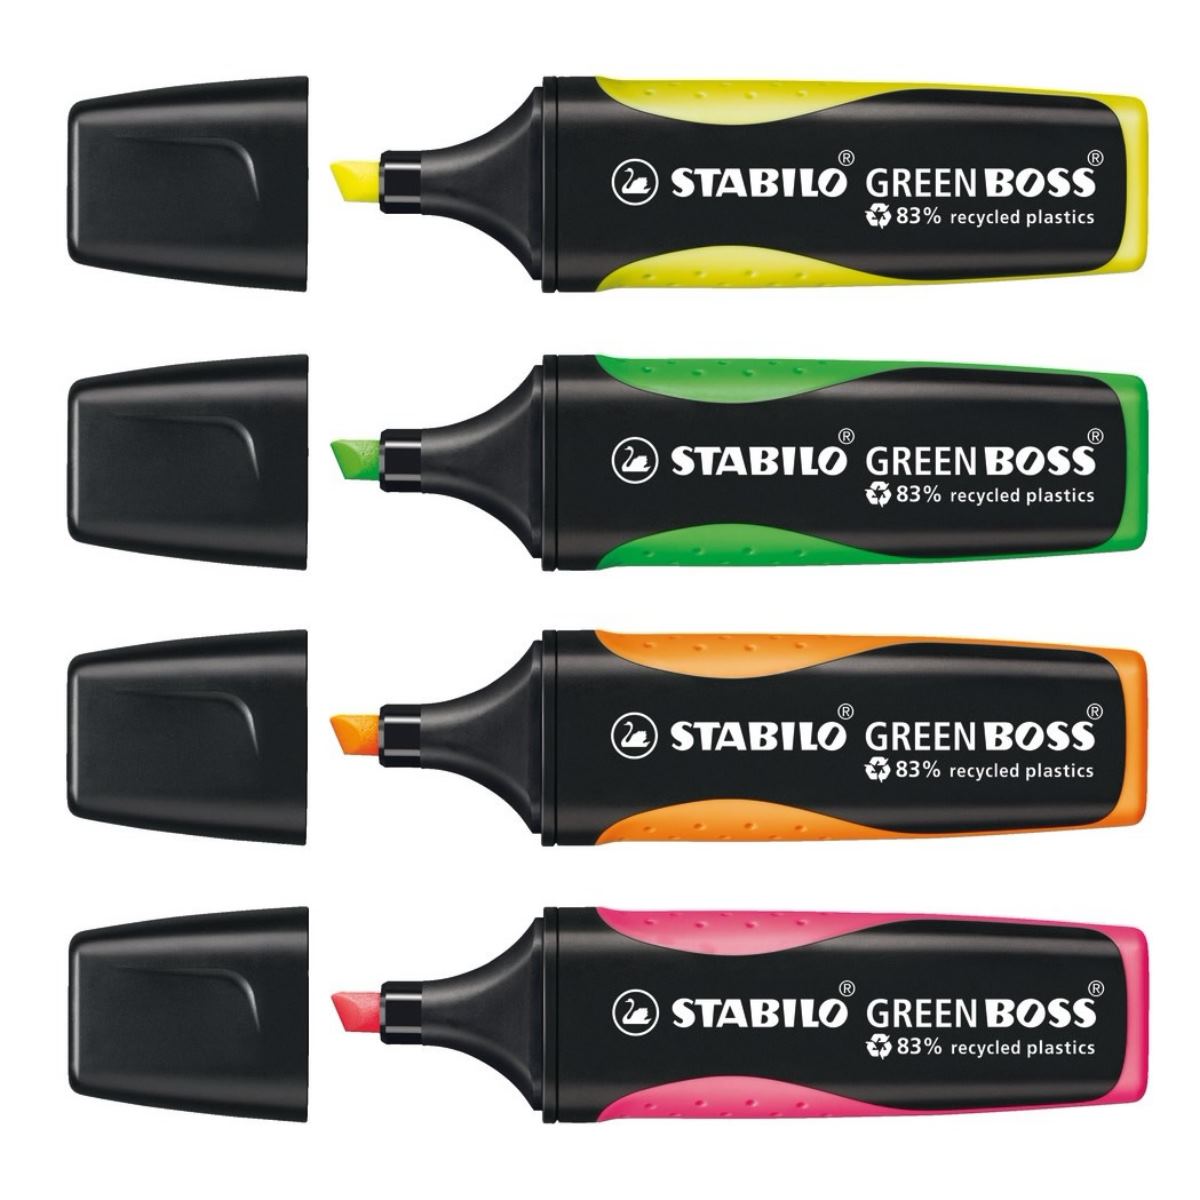 STABILO GREEN BOSS Highlighters - Pack of 4